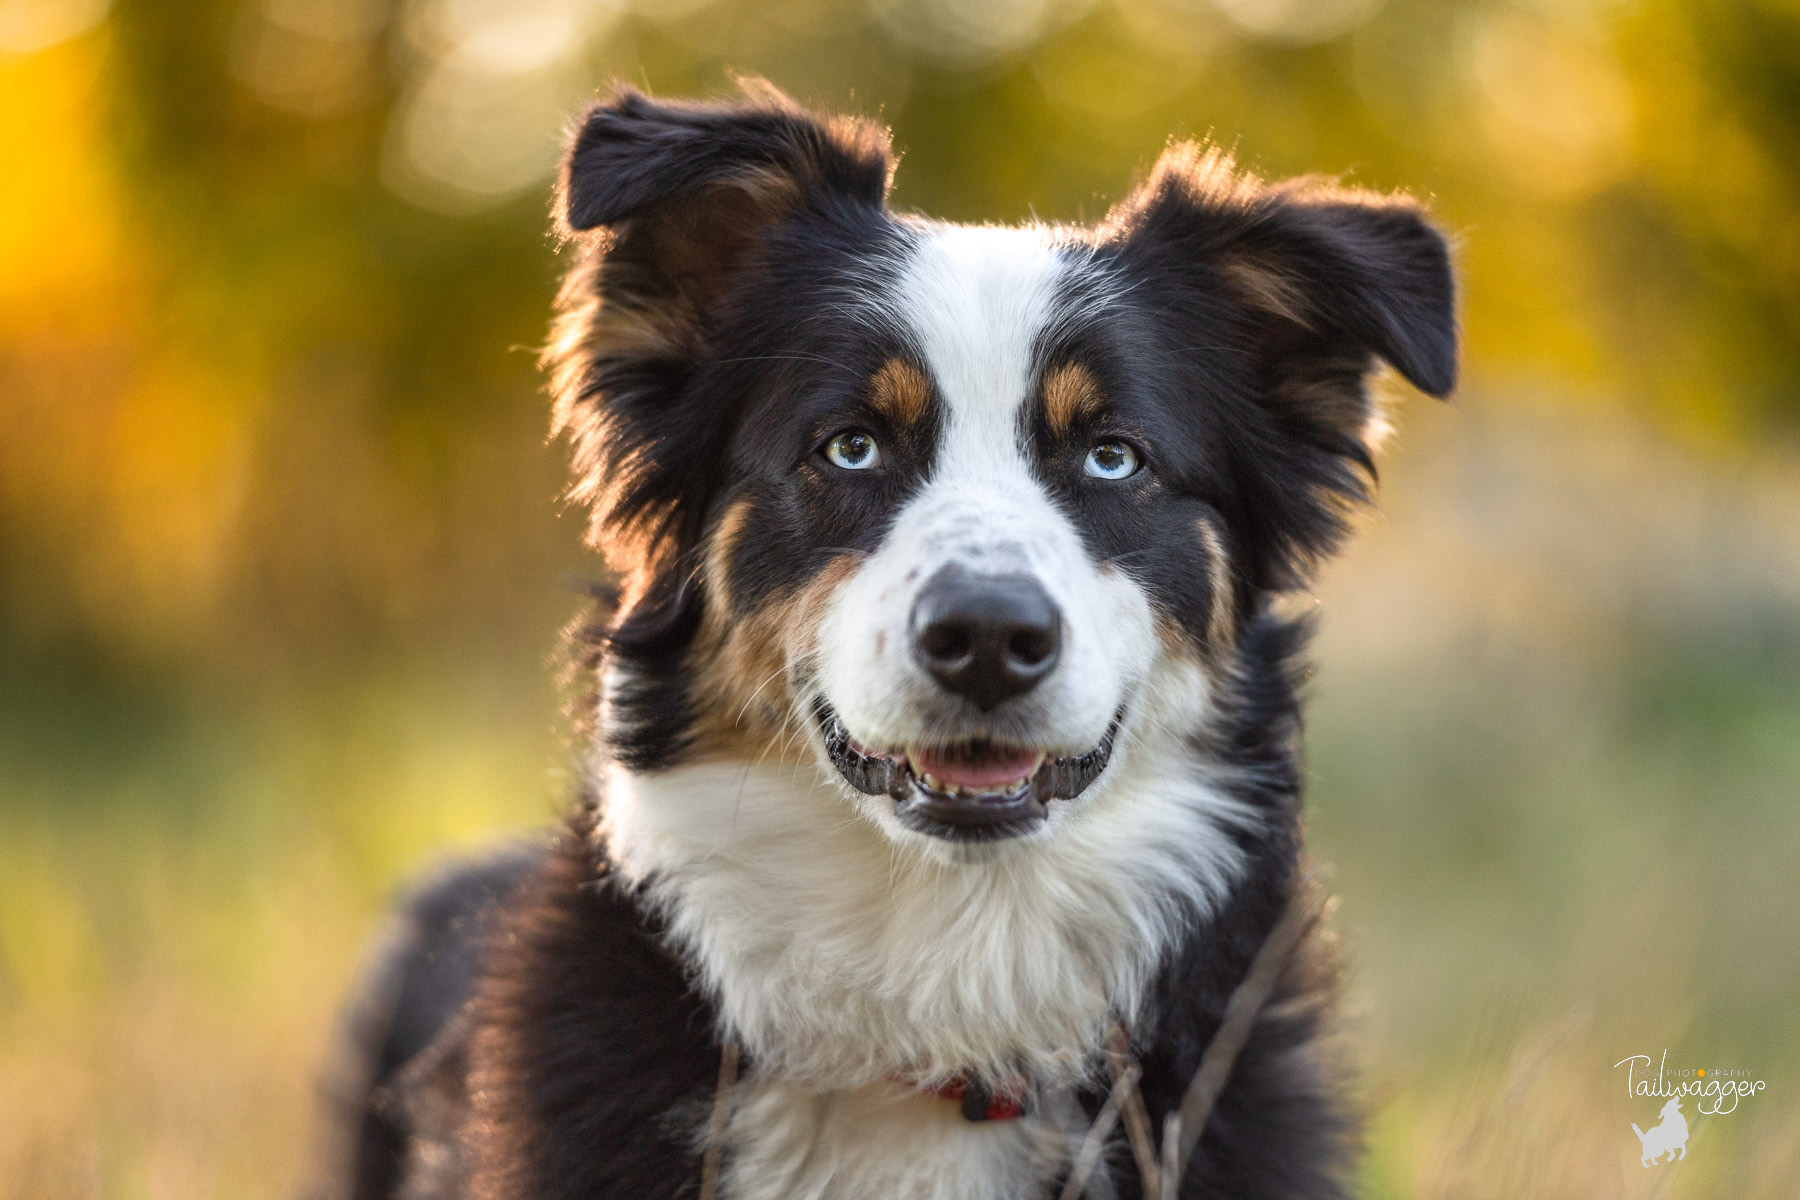 A headshot of a white, black and brown Aussie Shepherd with golden backlight coming through the trees behind him.